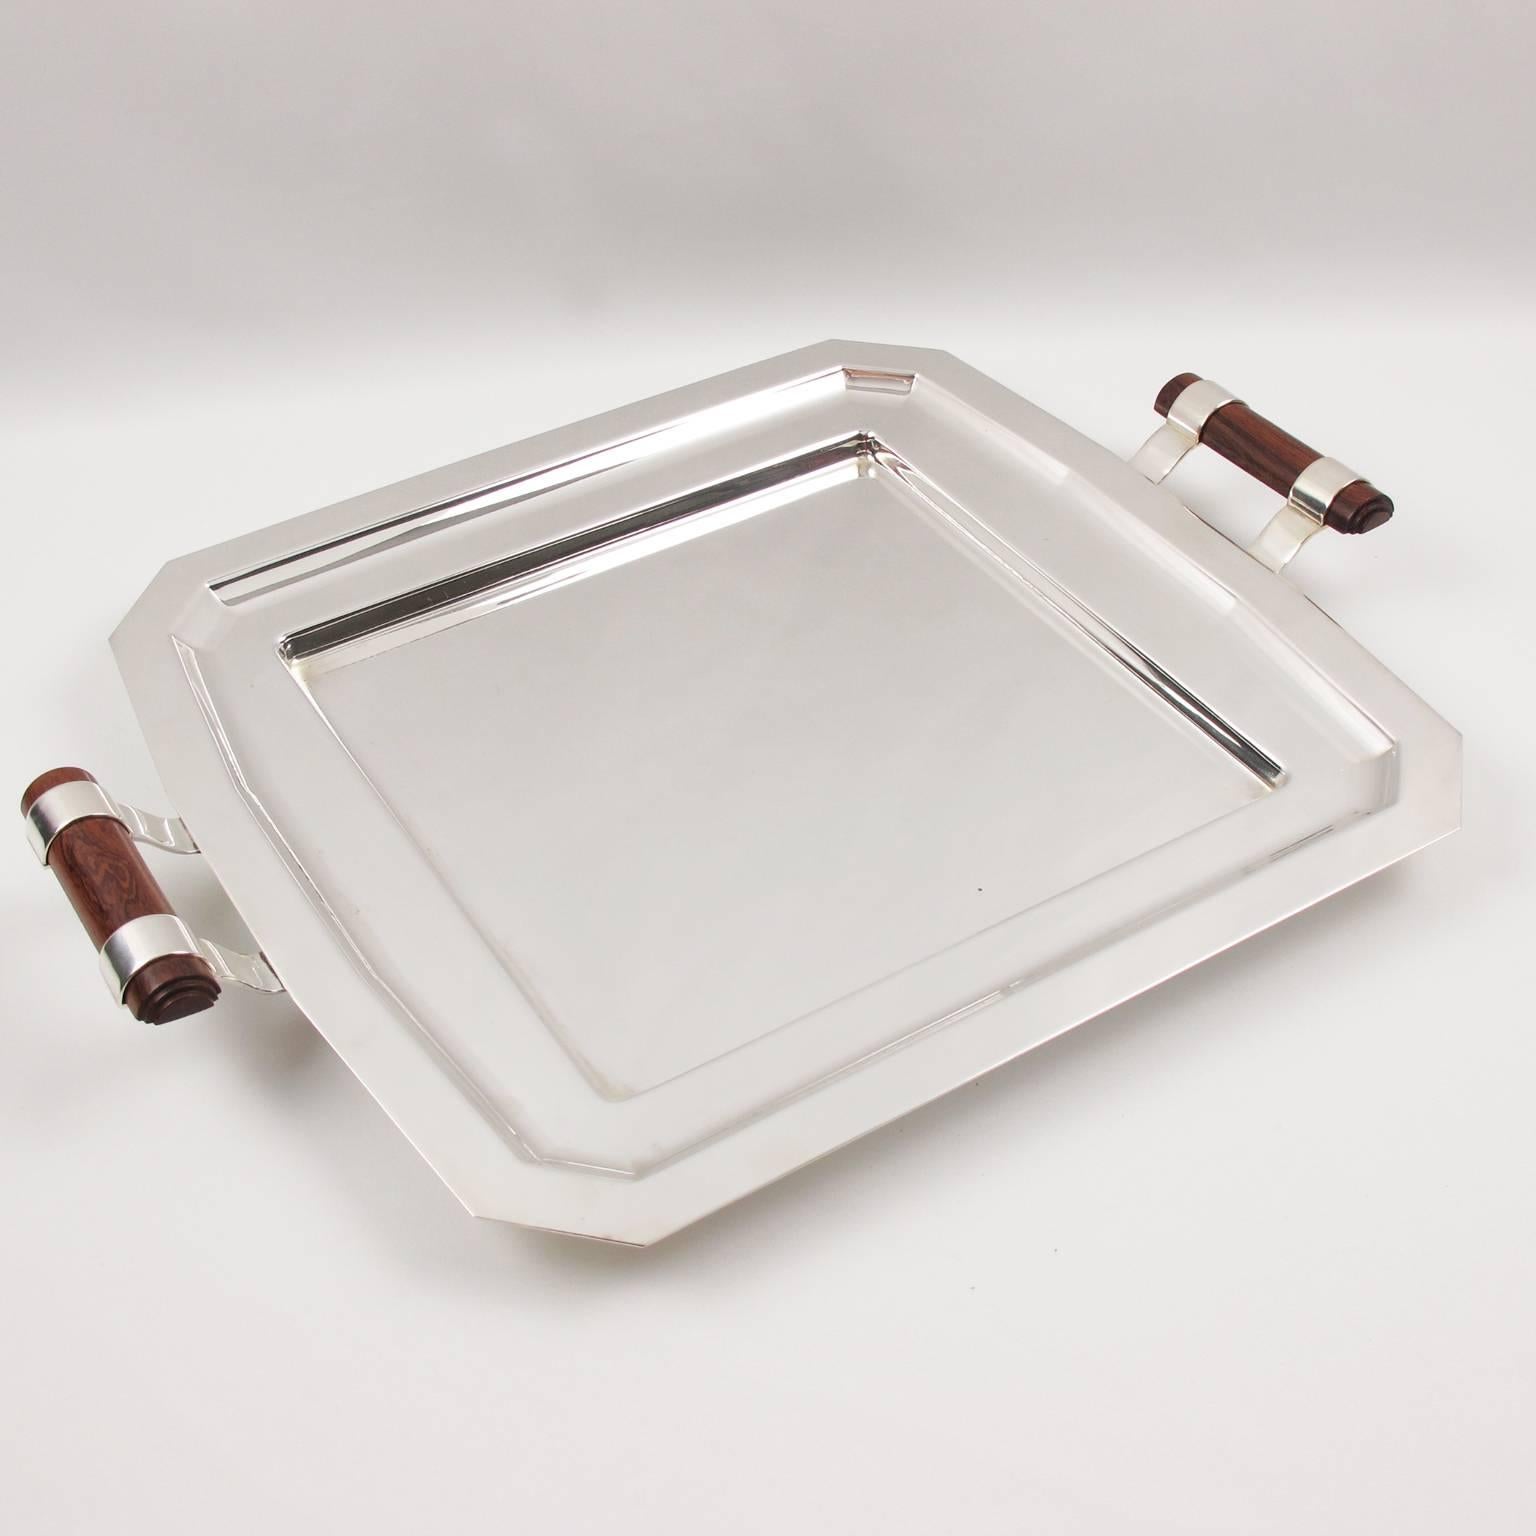 Mid-20th Century French Art Deco Hors D'oeuvres Barware Silver Plate Serving Tray & Dishes, 1930s